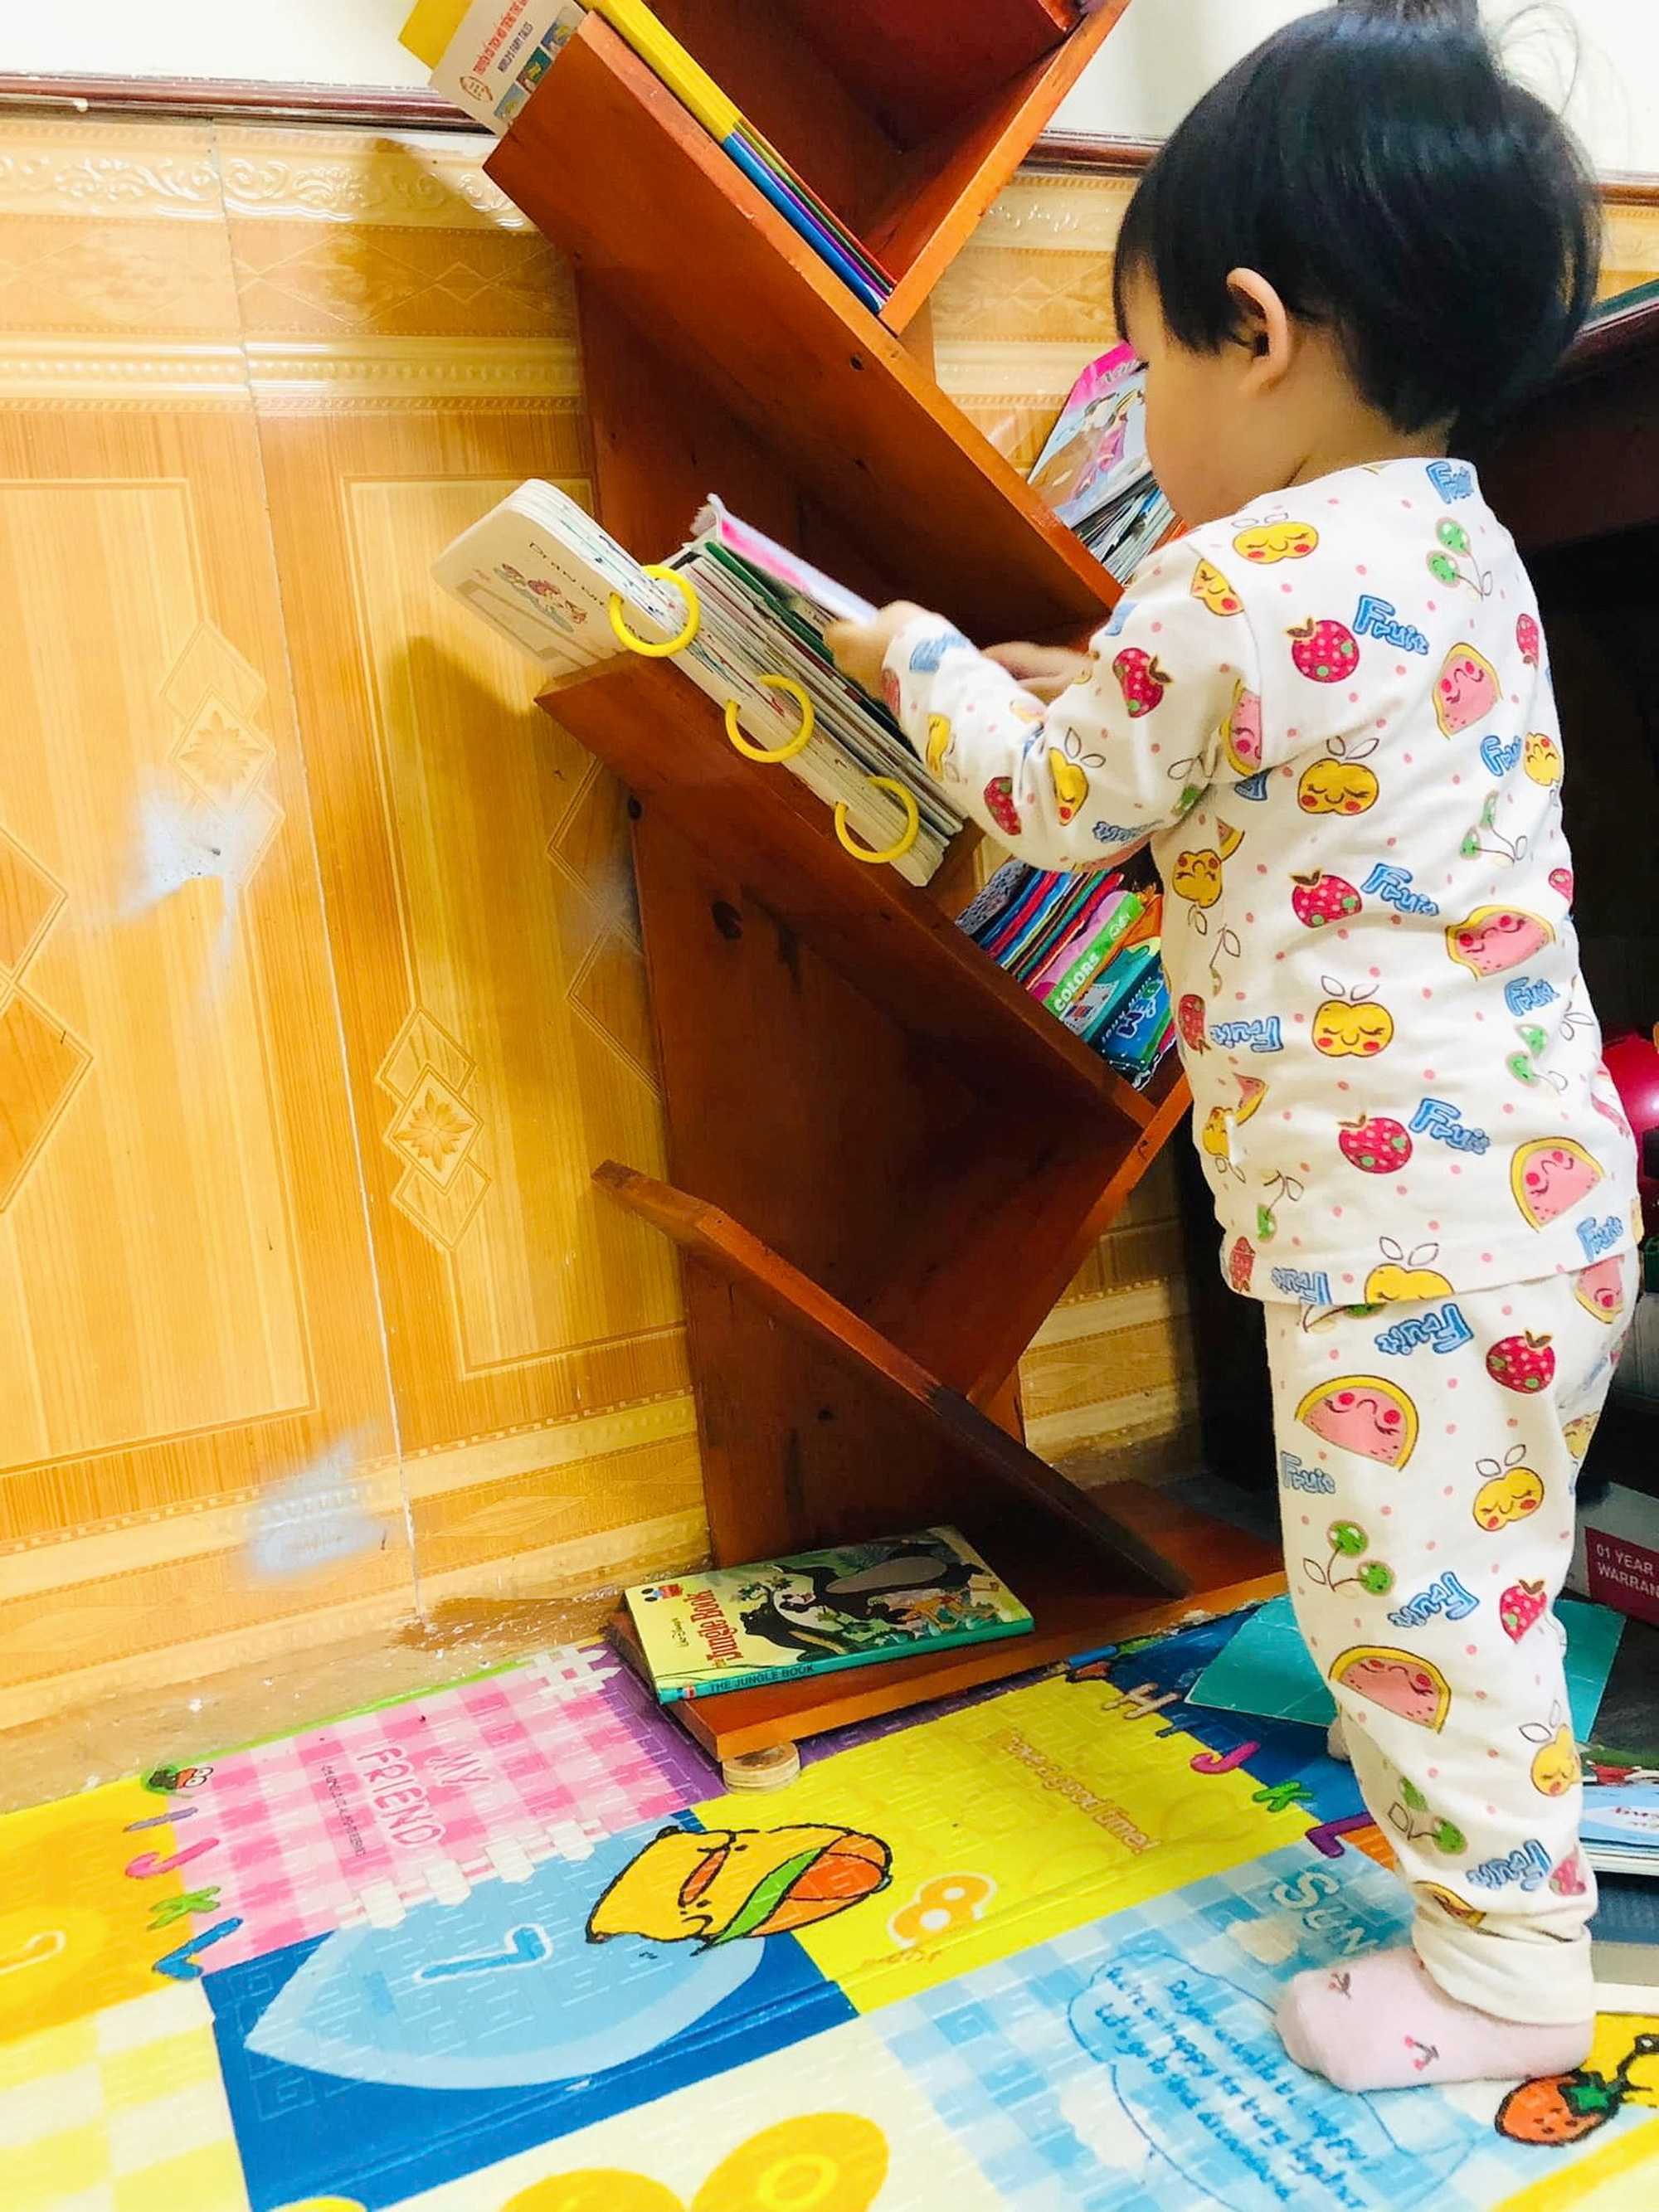 Vu Thuy Nga’s child takes a book from a shelf in their house in Ninh Binh Province, northern Vietnam. Photo: Supplied